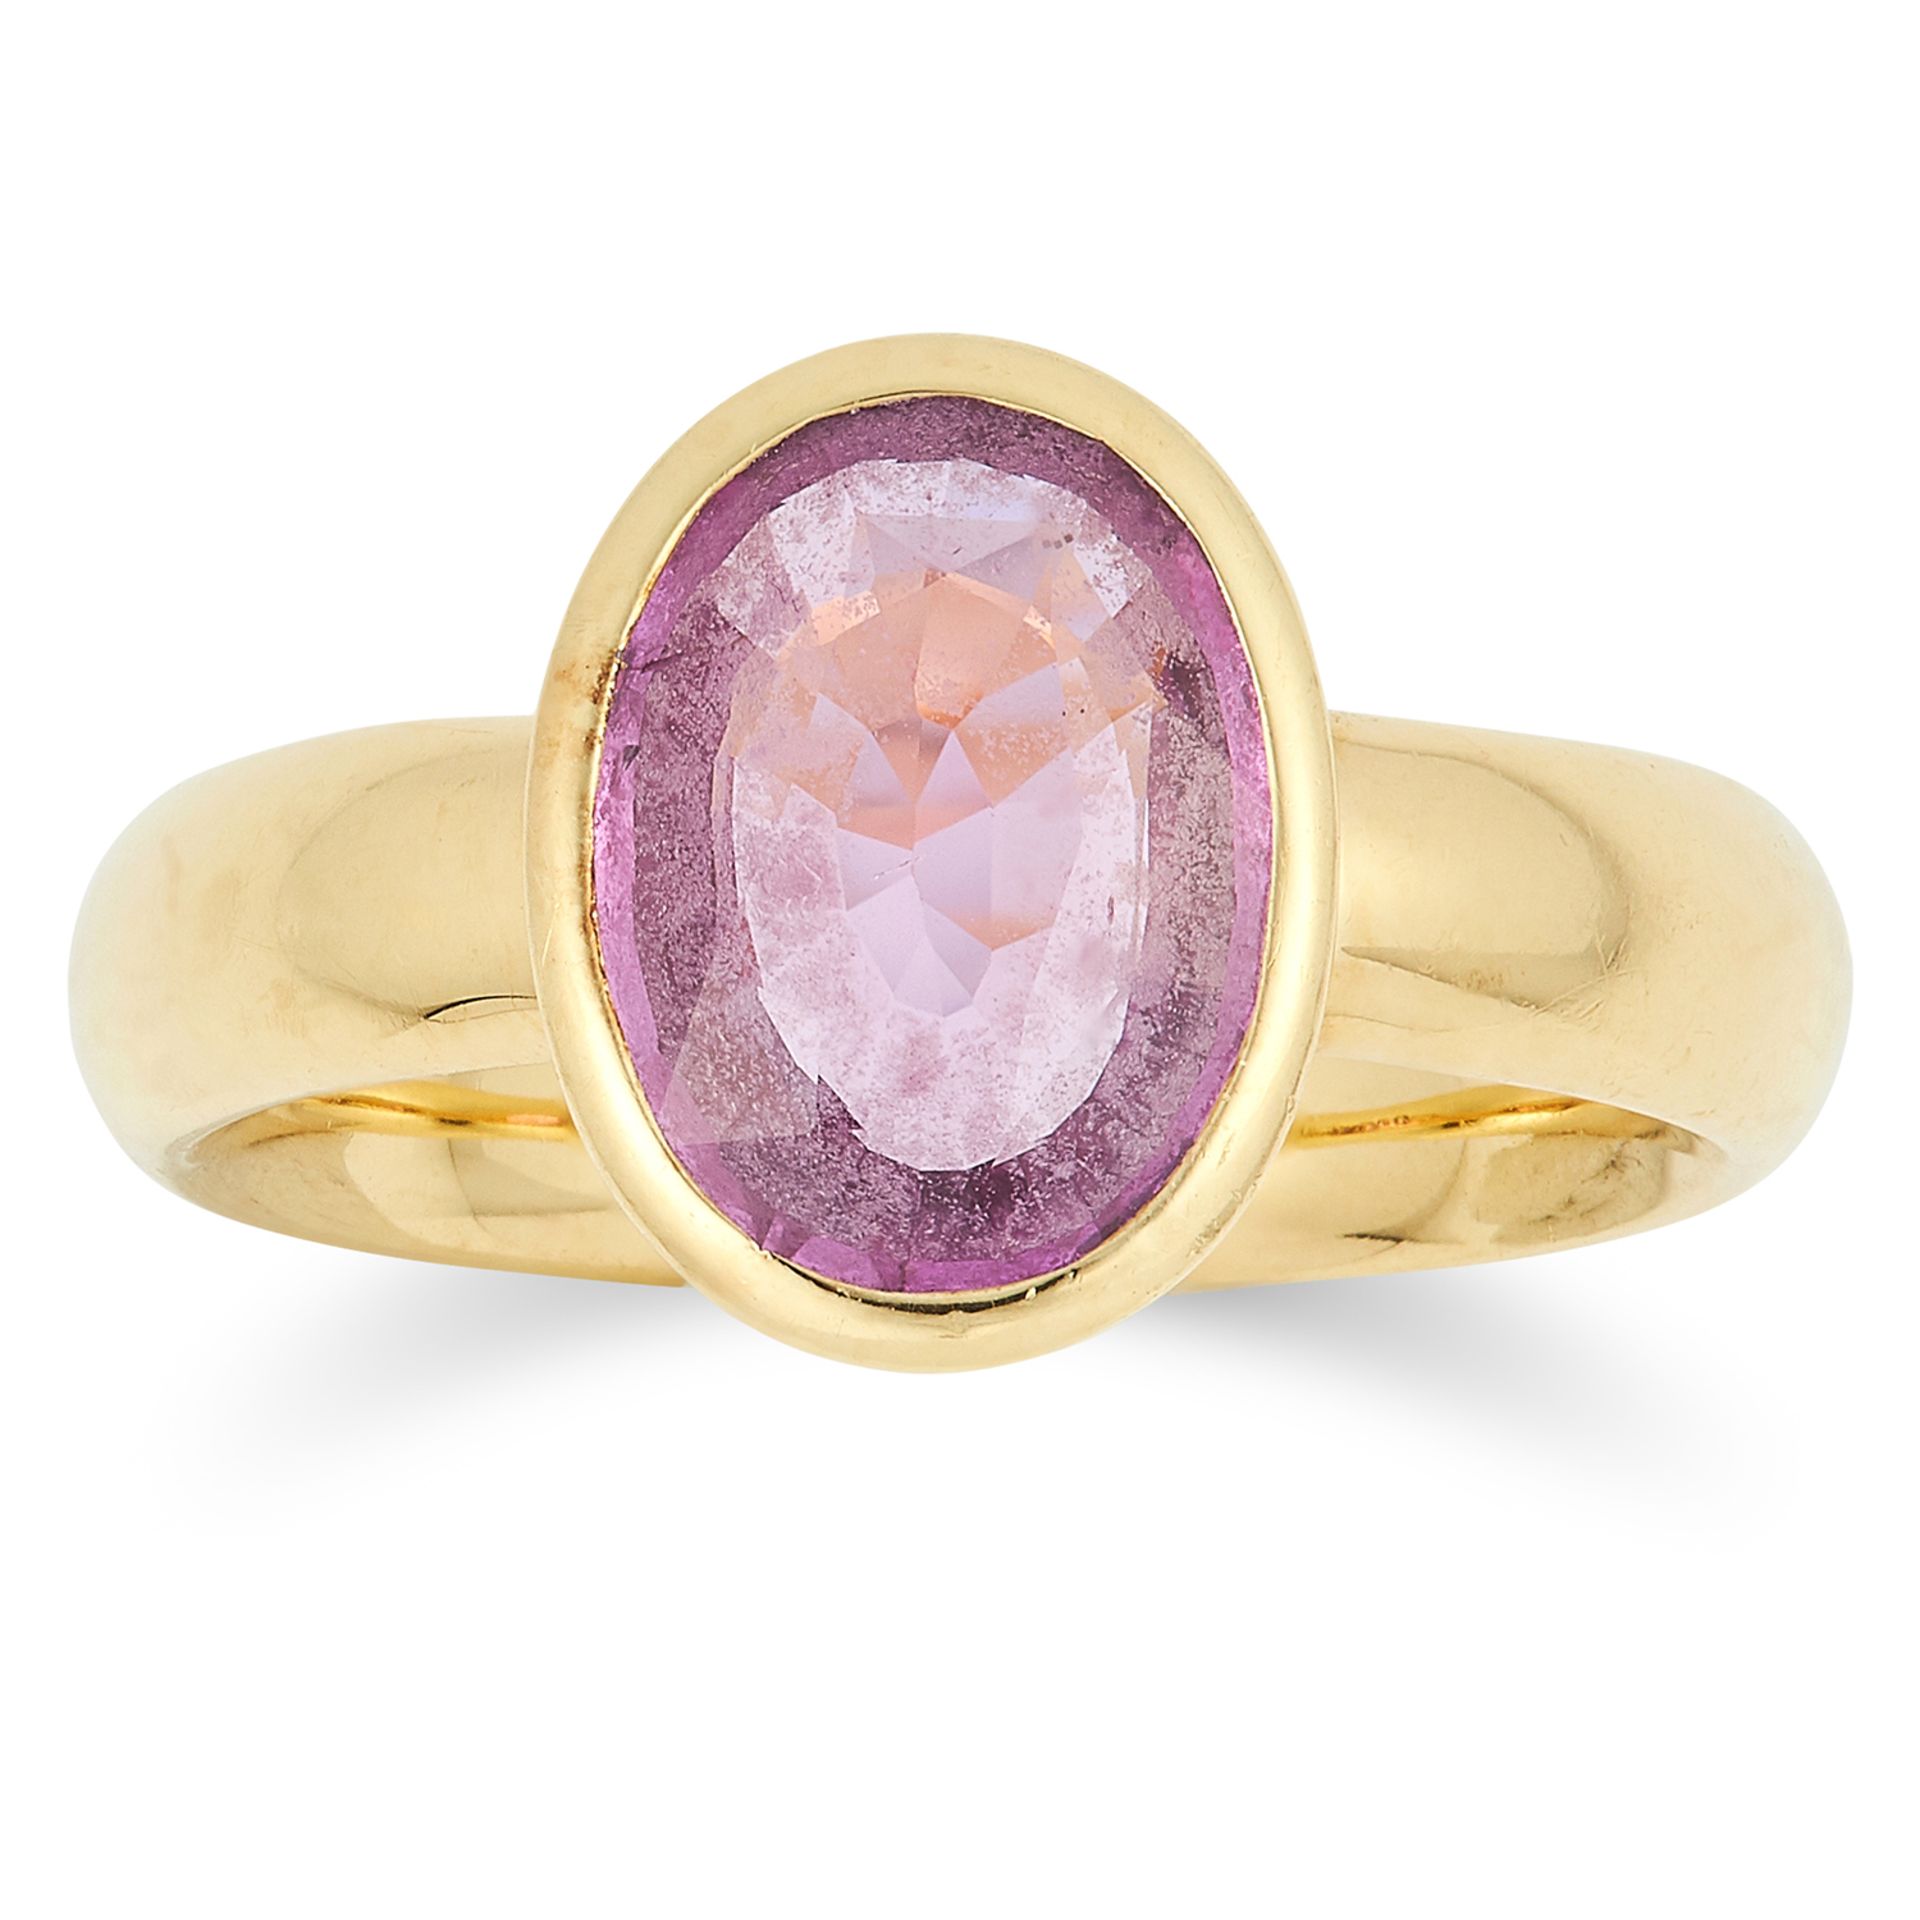 PINK SAPPHIRE RING set with an oval cut pink sapphire, on later George Jensen band, size L / 5.5,